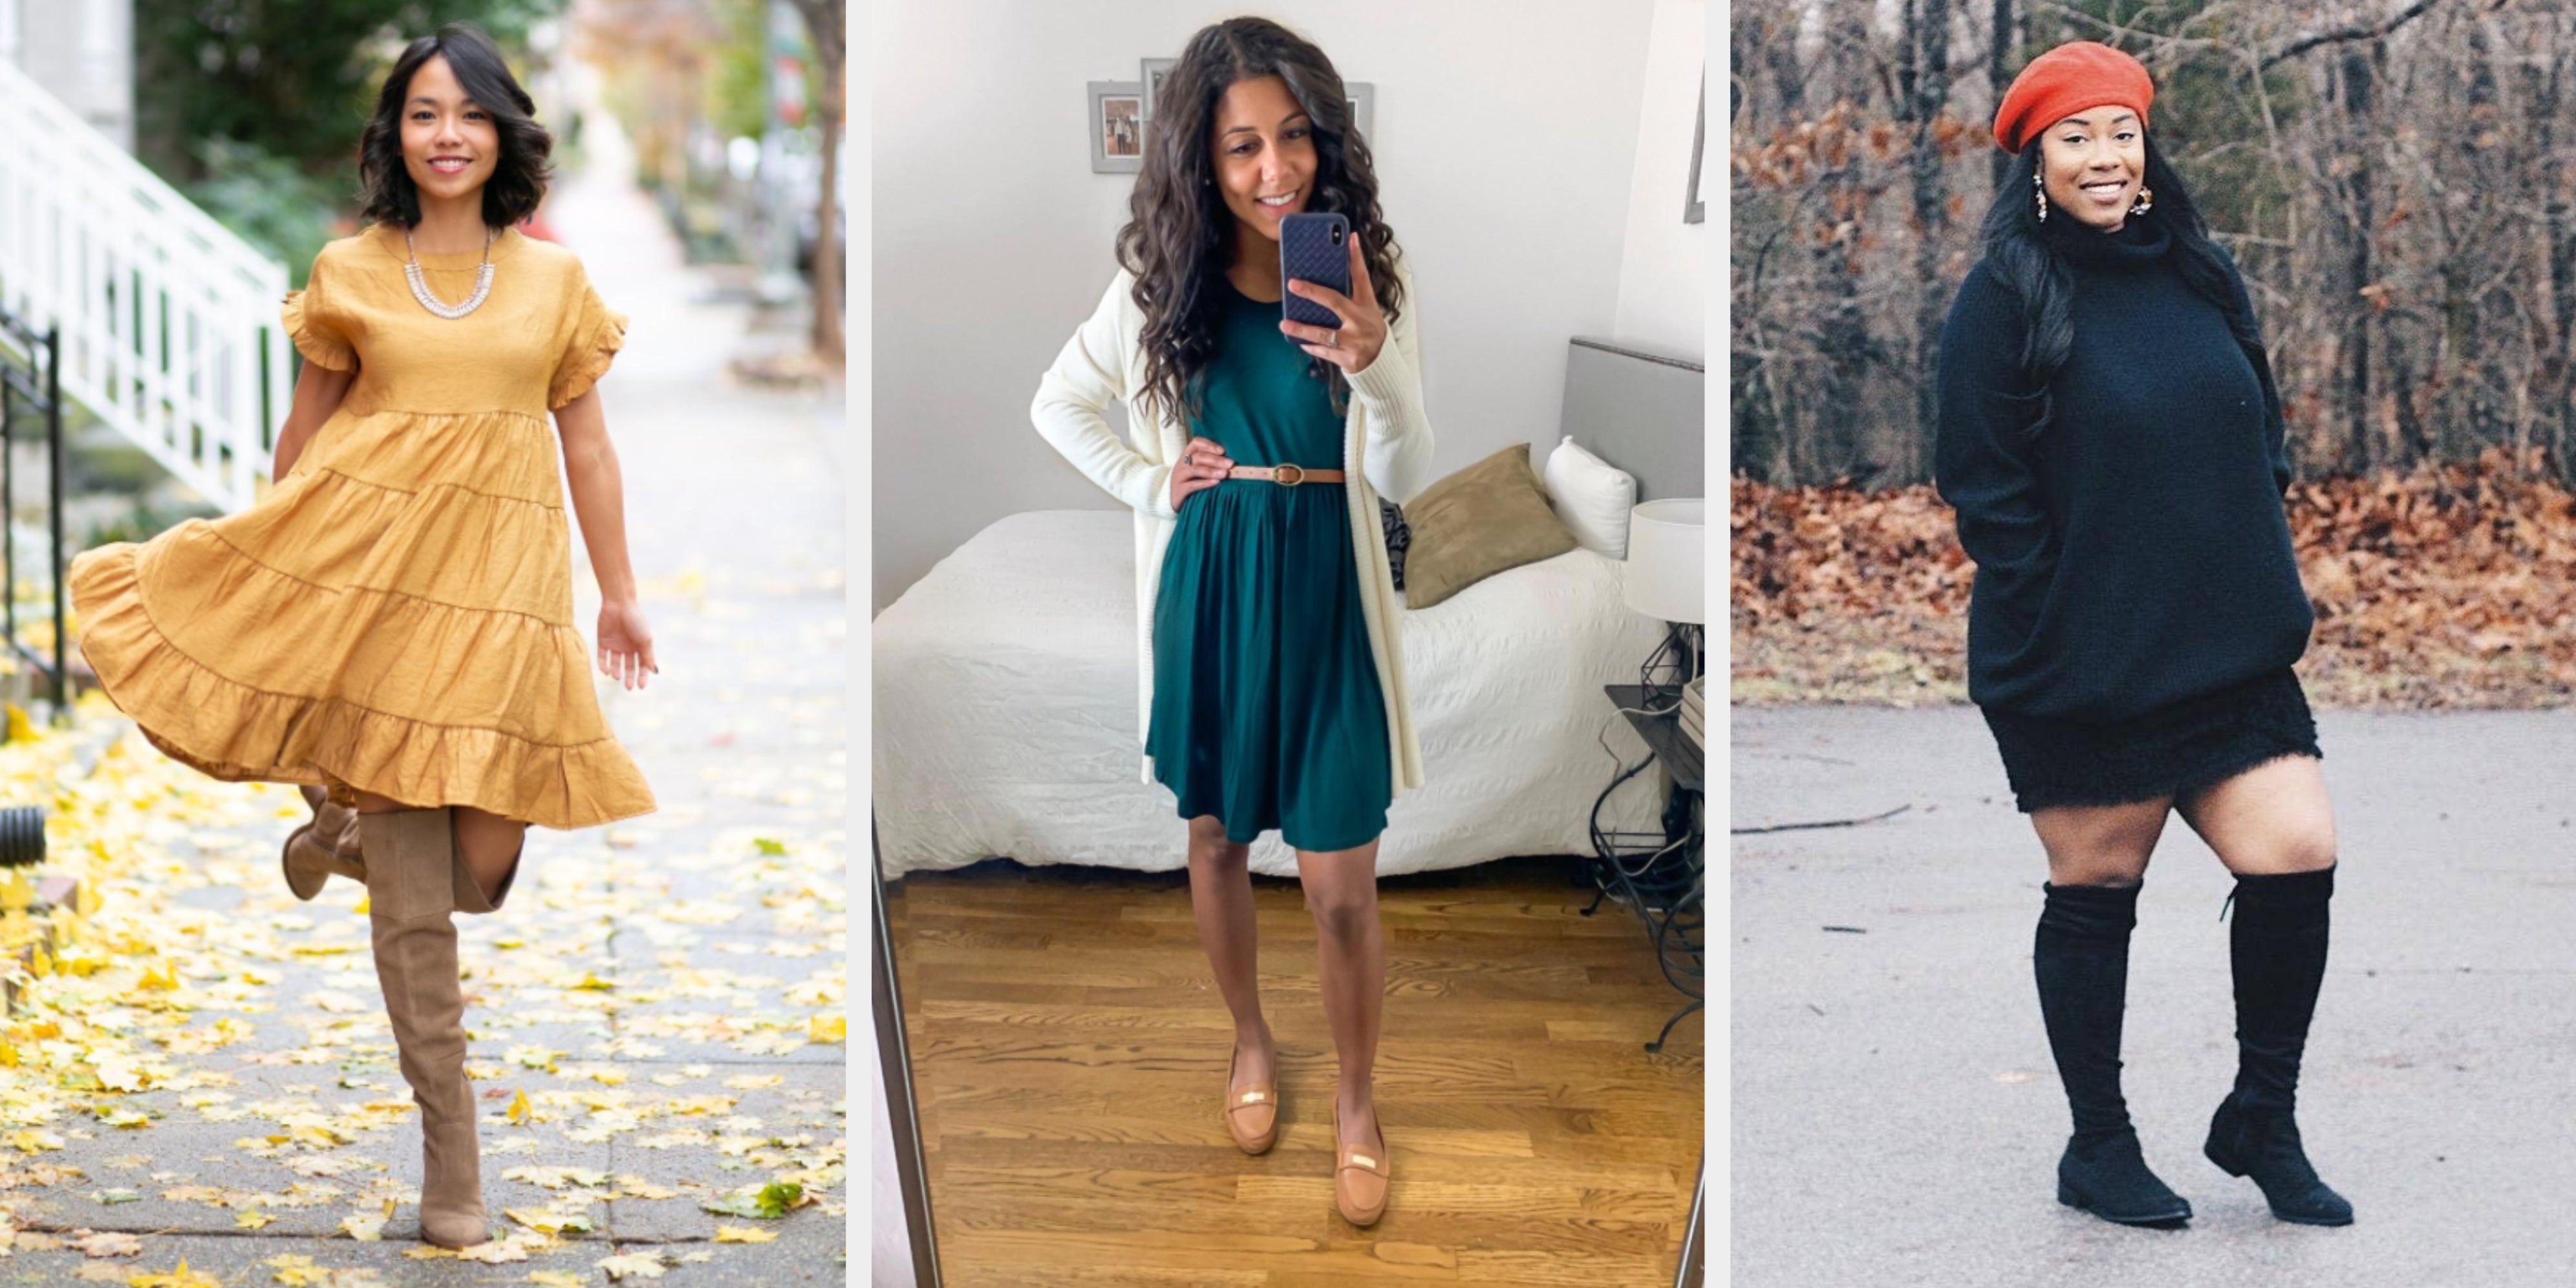 Velvet Cami Dress Outfits In Their 20s (2 ideas & outfits)